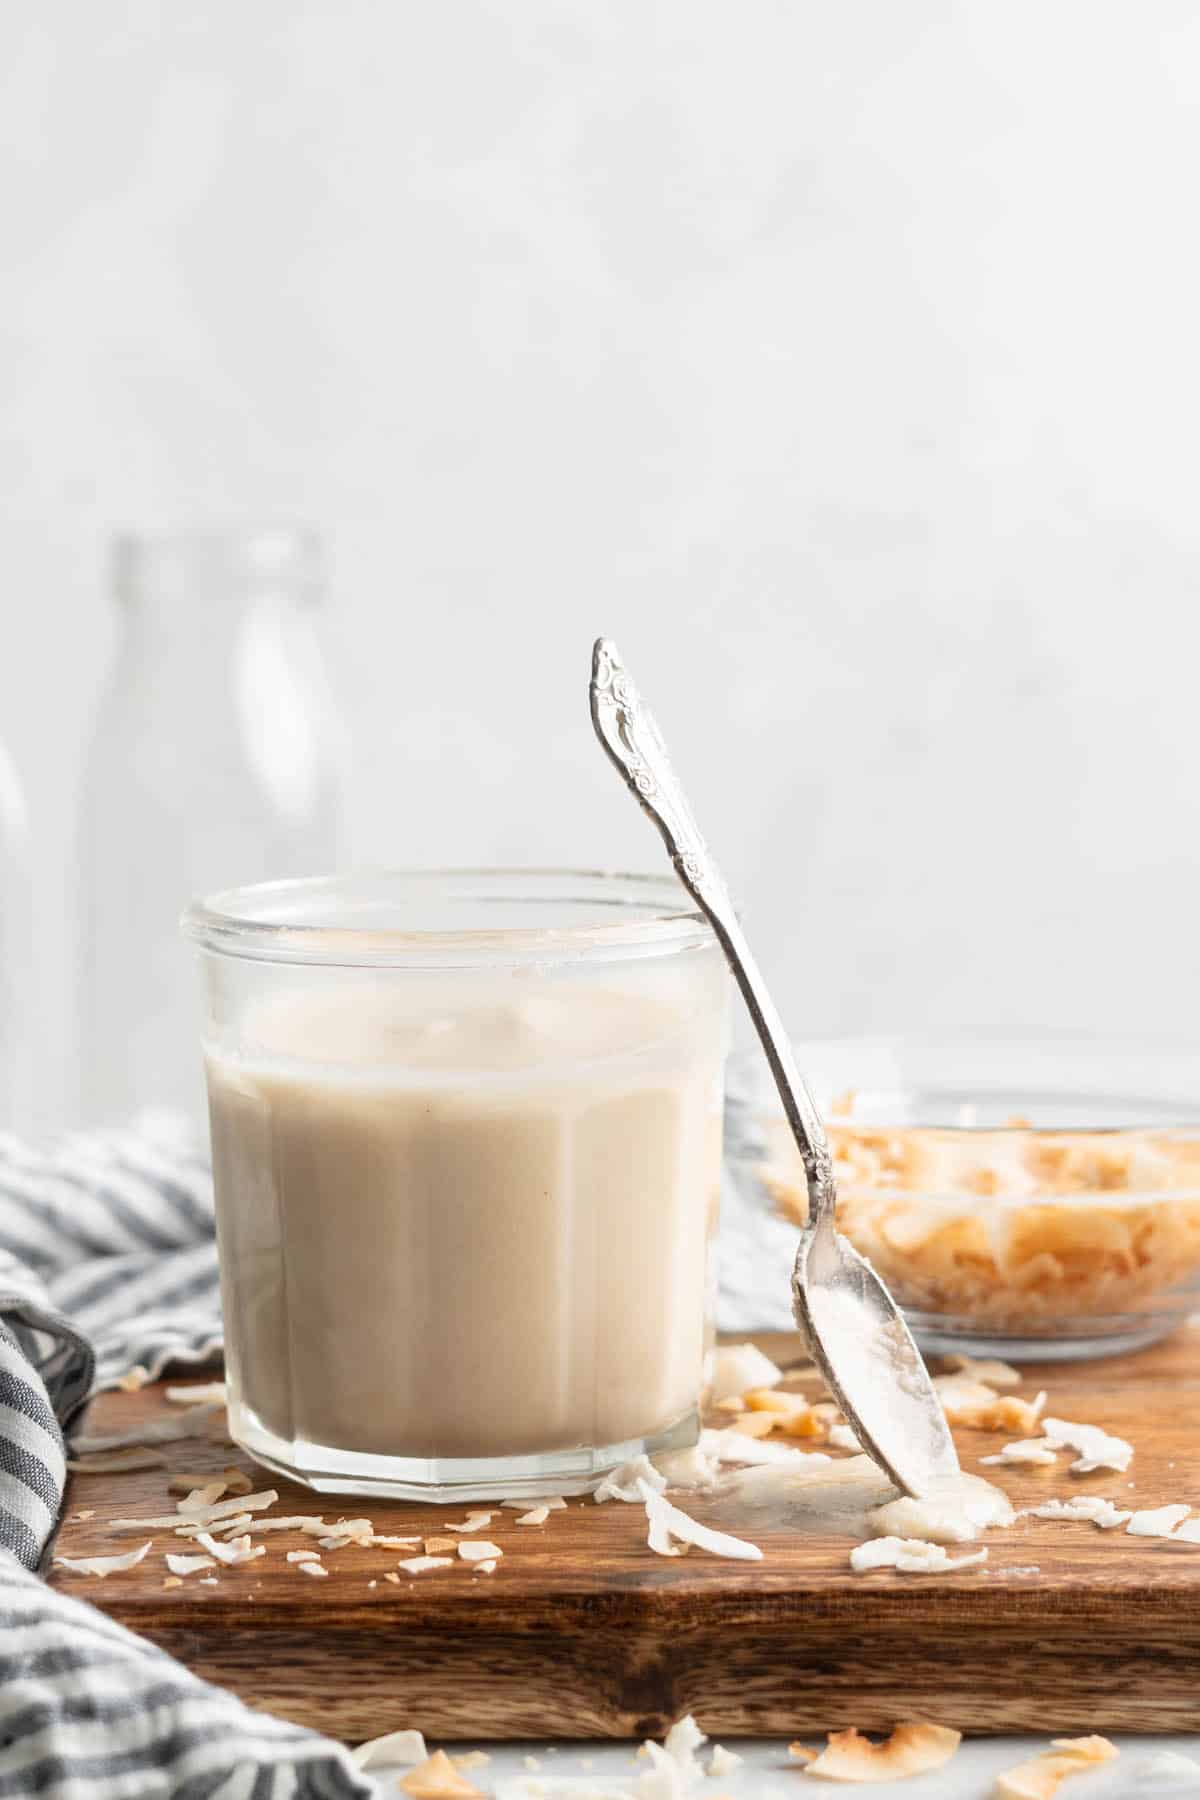 Coconut butter in jar with spoon next to it